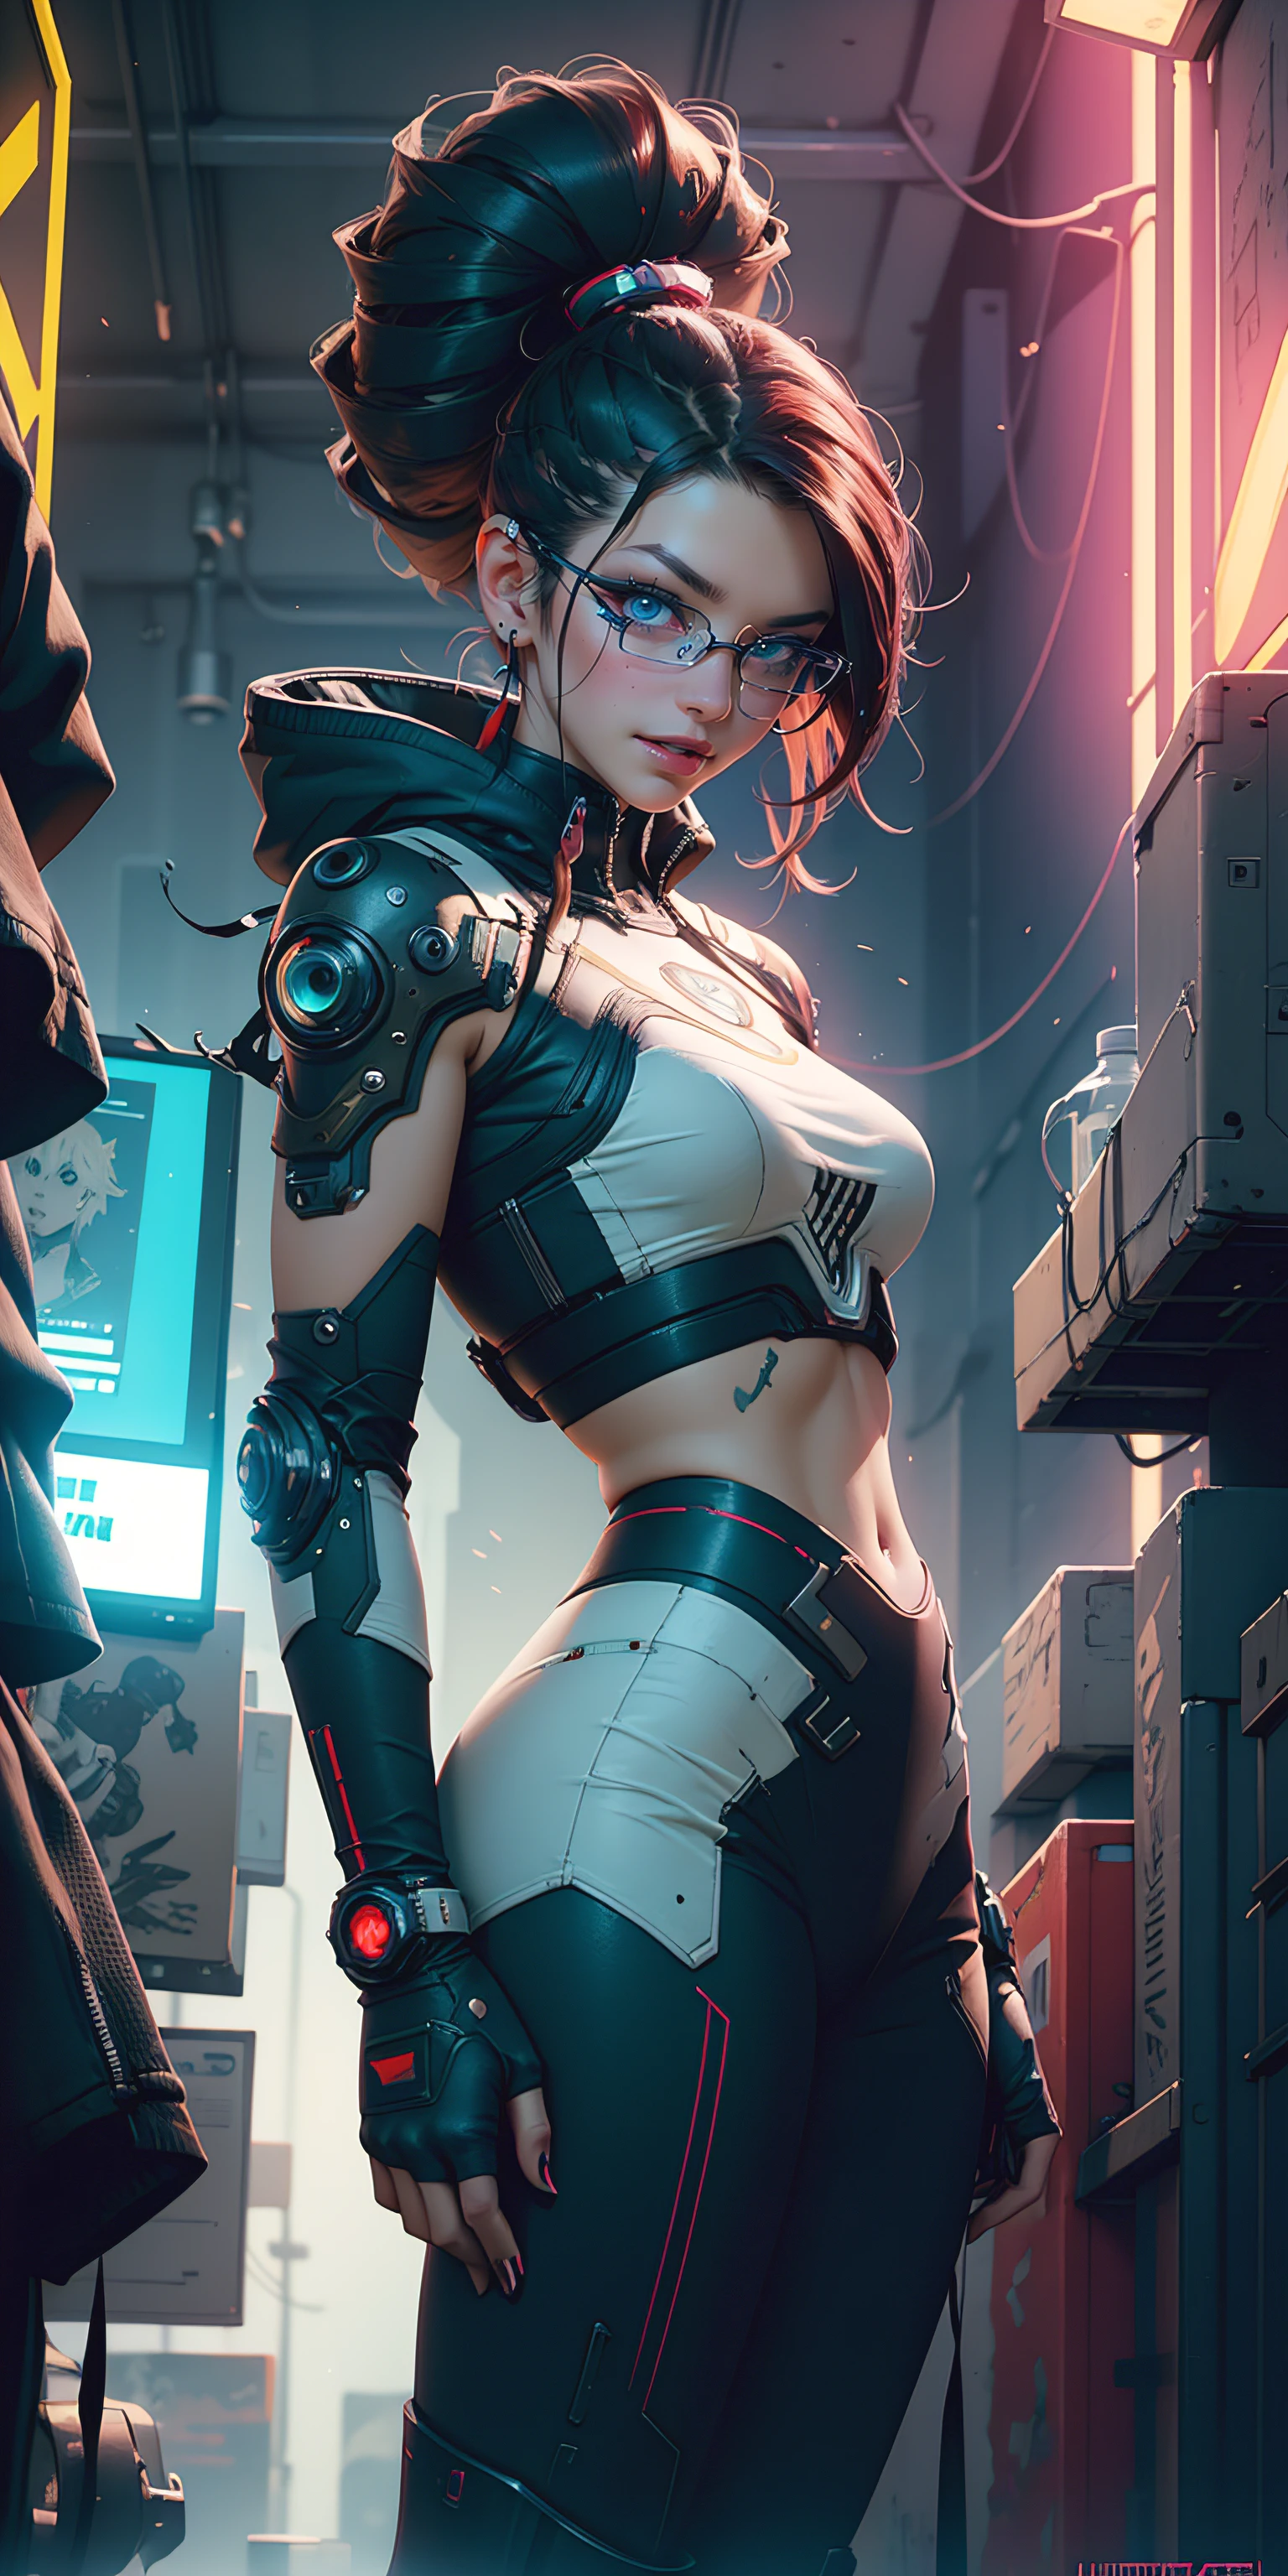 (masterpiece, best quality, ultra-detailed, Photorealistic), 1 girl, curvaceous but slender body, upper body shot, There is a woman with large wet marked breasts in a futuristic outfit posing for a photo, chica cyborg, linda chica cyborg, Cyberpunk anime girly girl, Cyberpunk anime chica mech, Chica cyberpunk, sci-fi female, Wojtek FUS, Cyberpunk beautiful girl, WLOP. scifi, cyberpunk 2 0 y. o Model girl, girl in mecha cyber armor, seductive cyberpunk dark fantasy, cyberpun anime girl